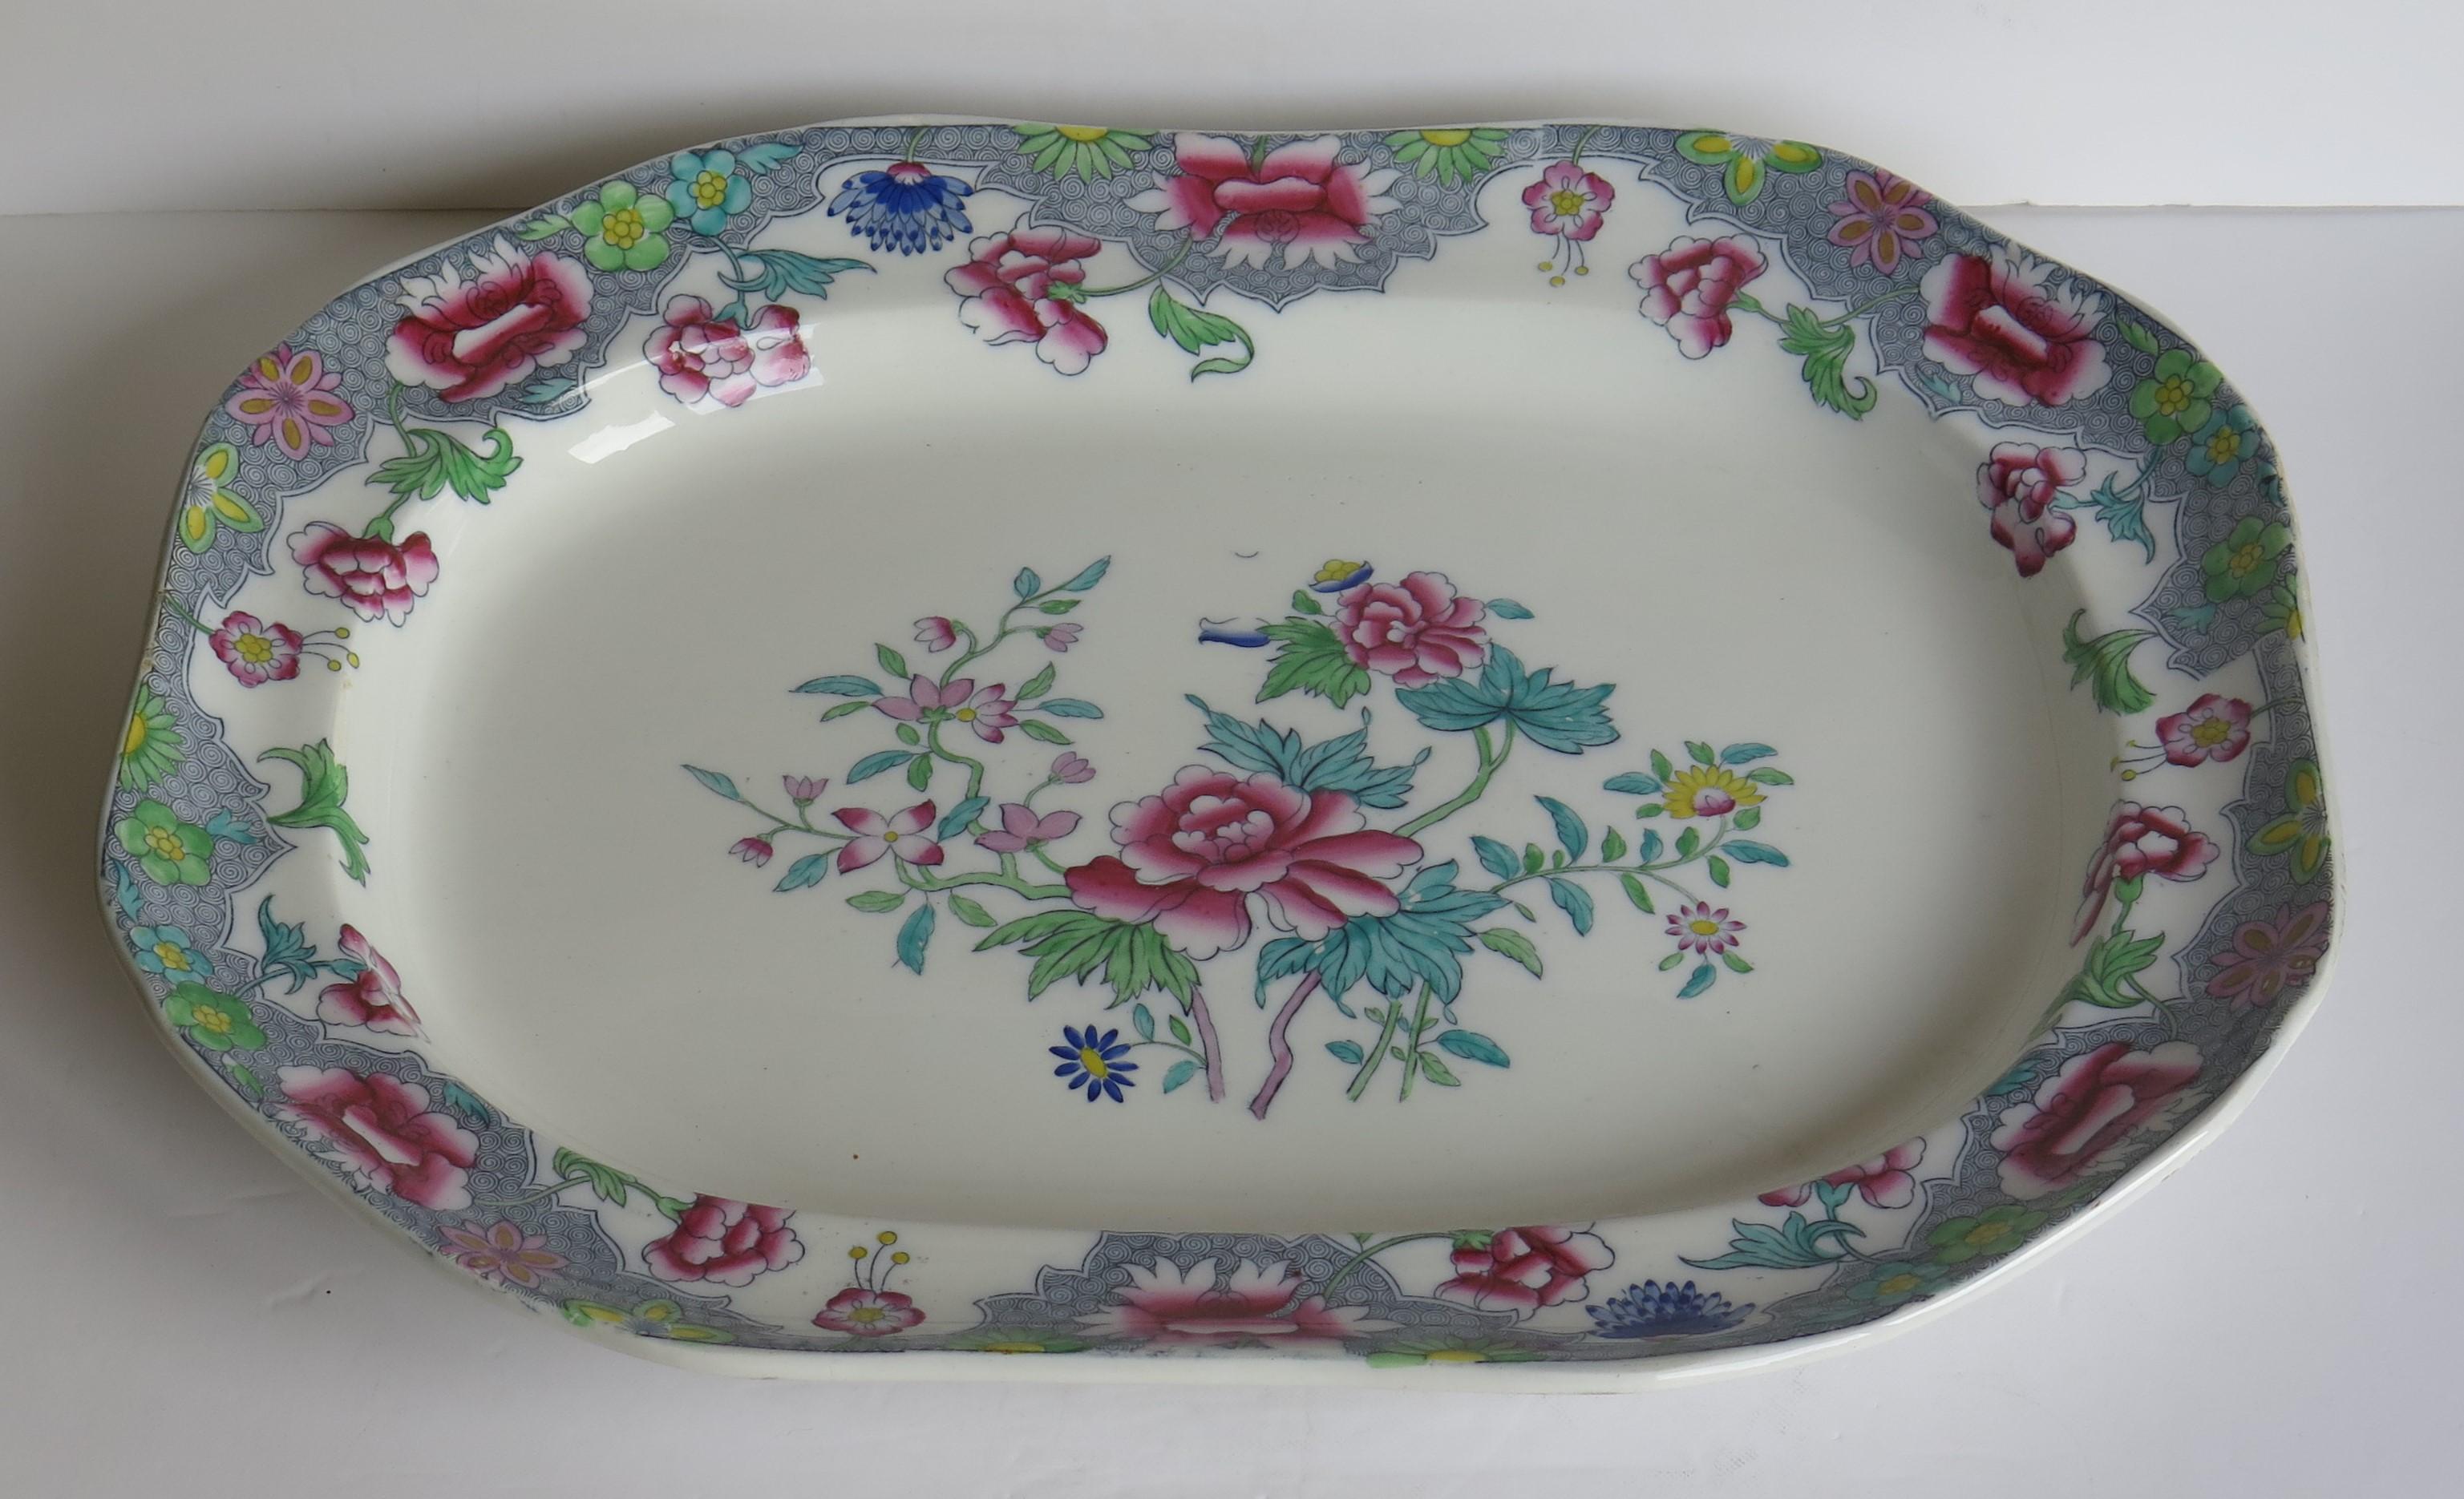 This is a beautiful large Platter or meat plate by Copeland (formerly Spode) in a very decorative floral pattern No. 8036, England, dating to circa 1850.

The piece is well potted as a large rectangular plate or platter with bevelled corners. It